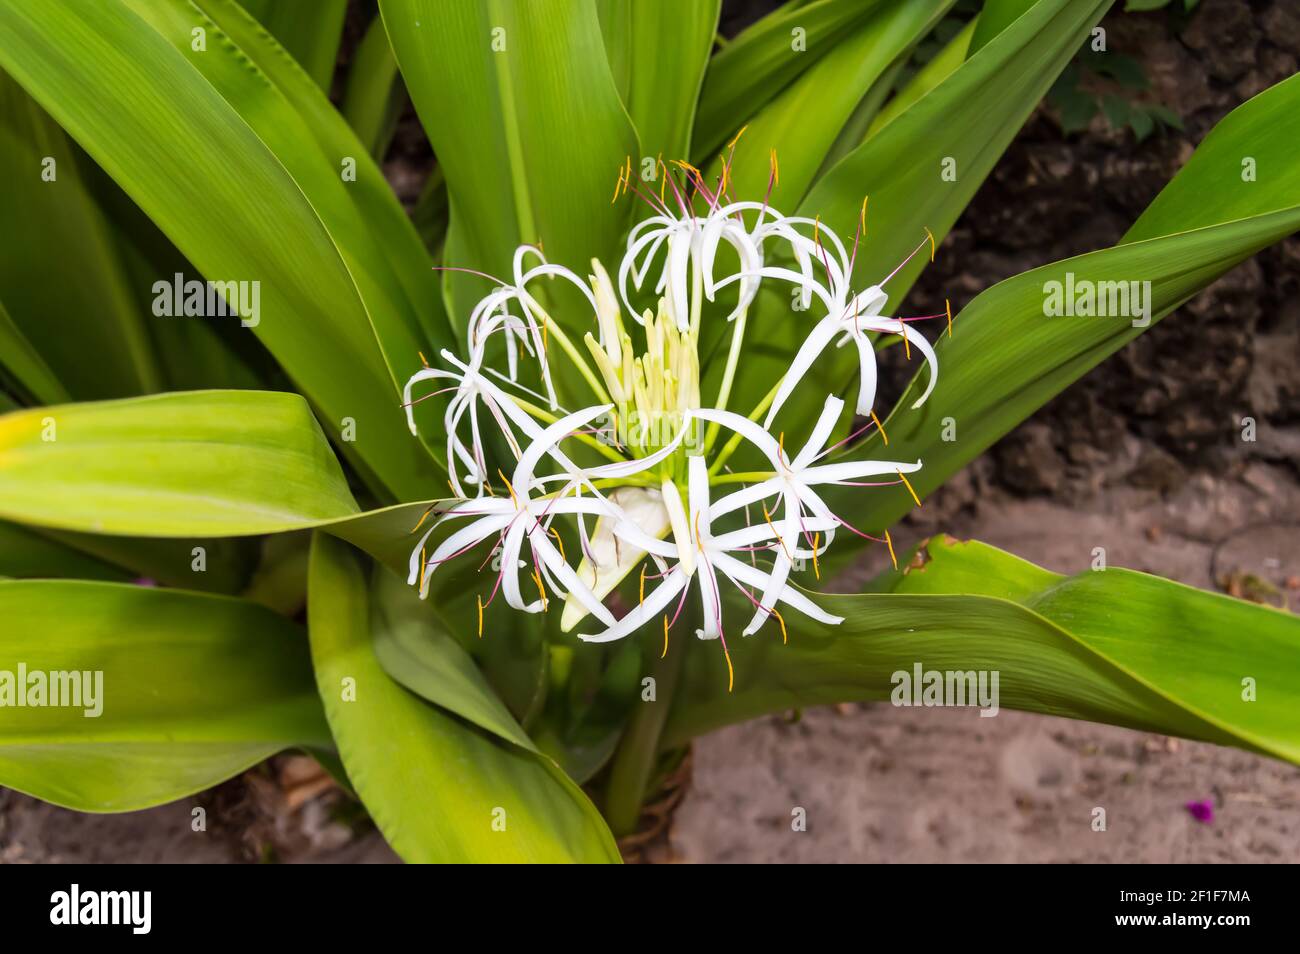 White Crinum flower in the blurred background in high resolution near the town of Gede in Kenya Stock Photo